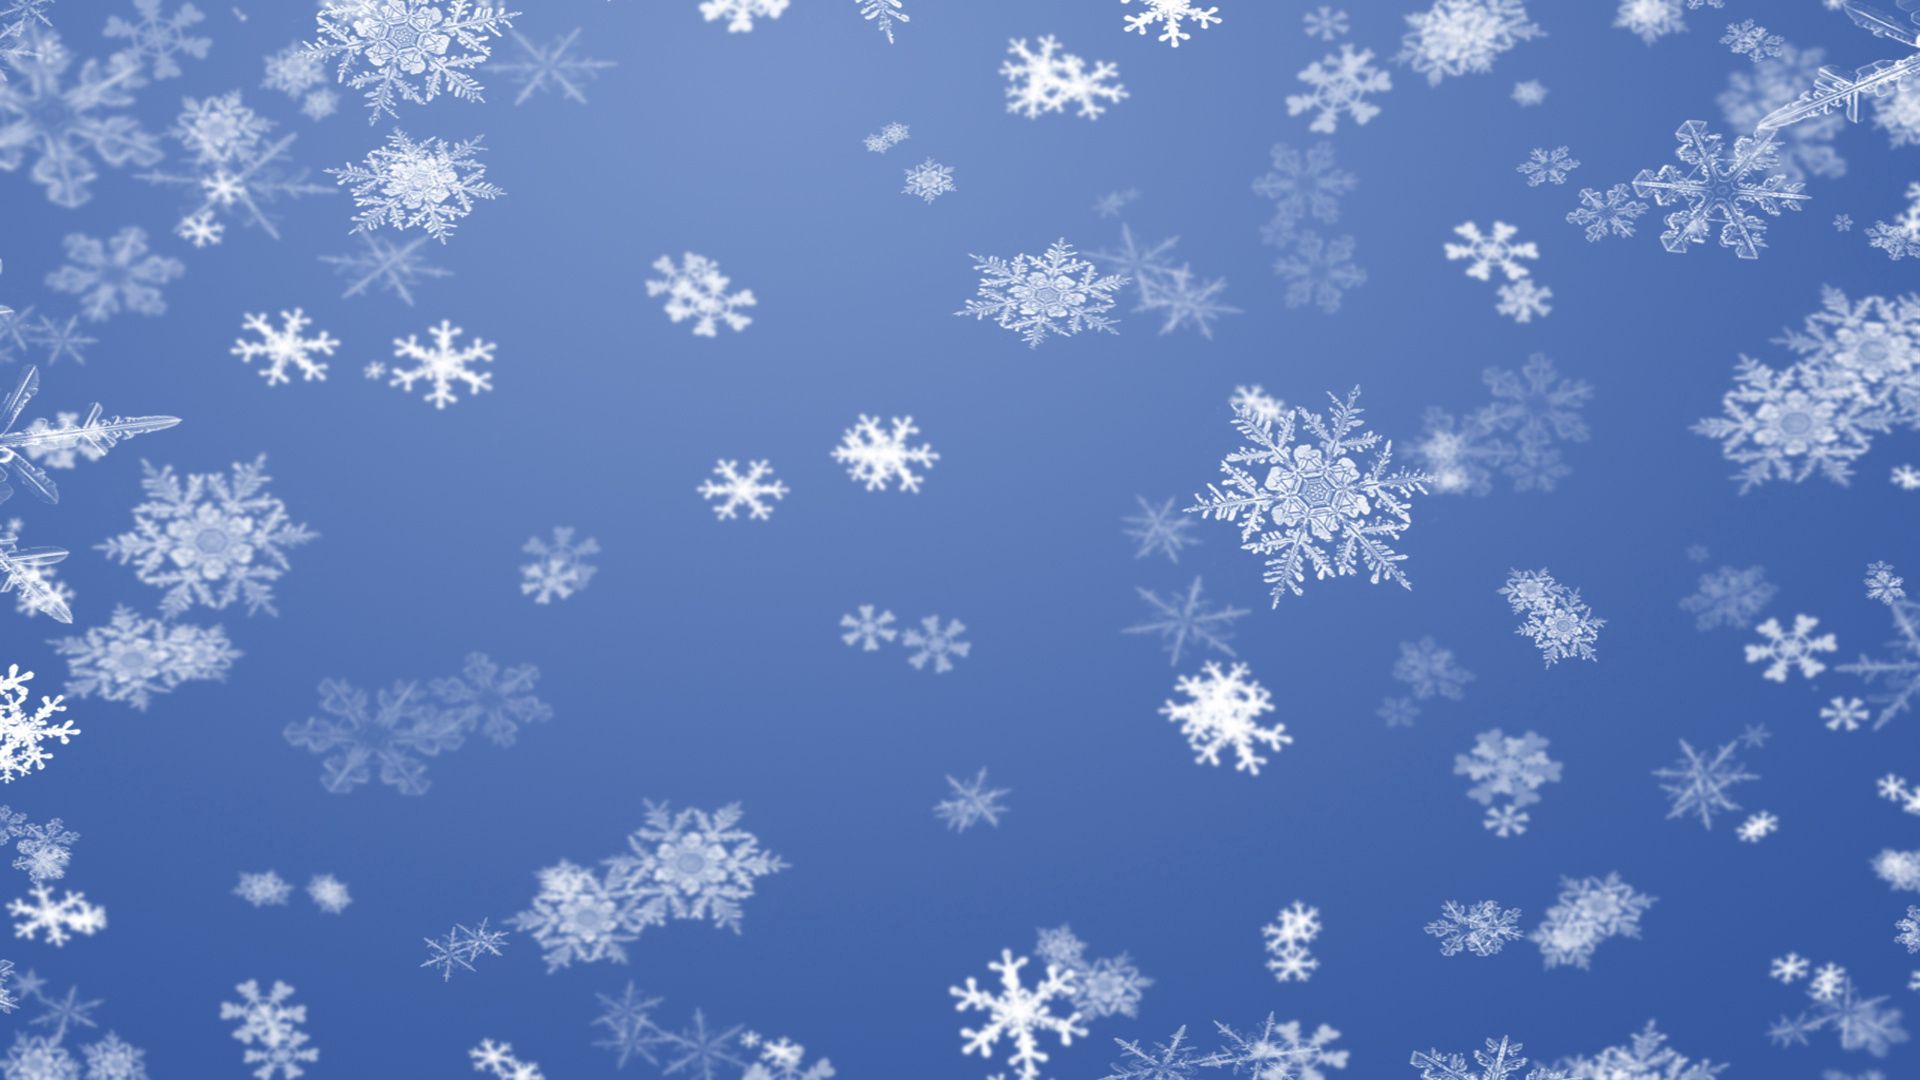 patterns, snowflakes, winter, background, texture, textures lock screen backgrounds